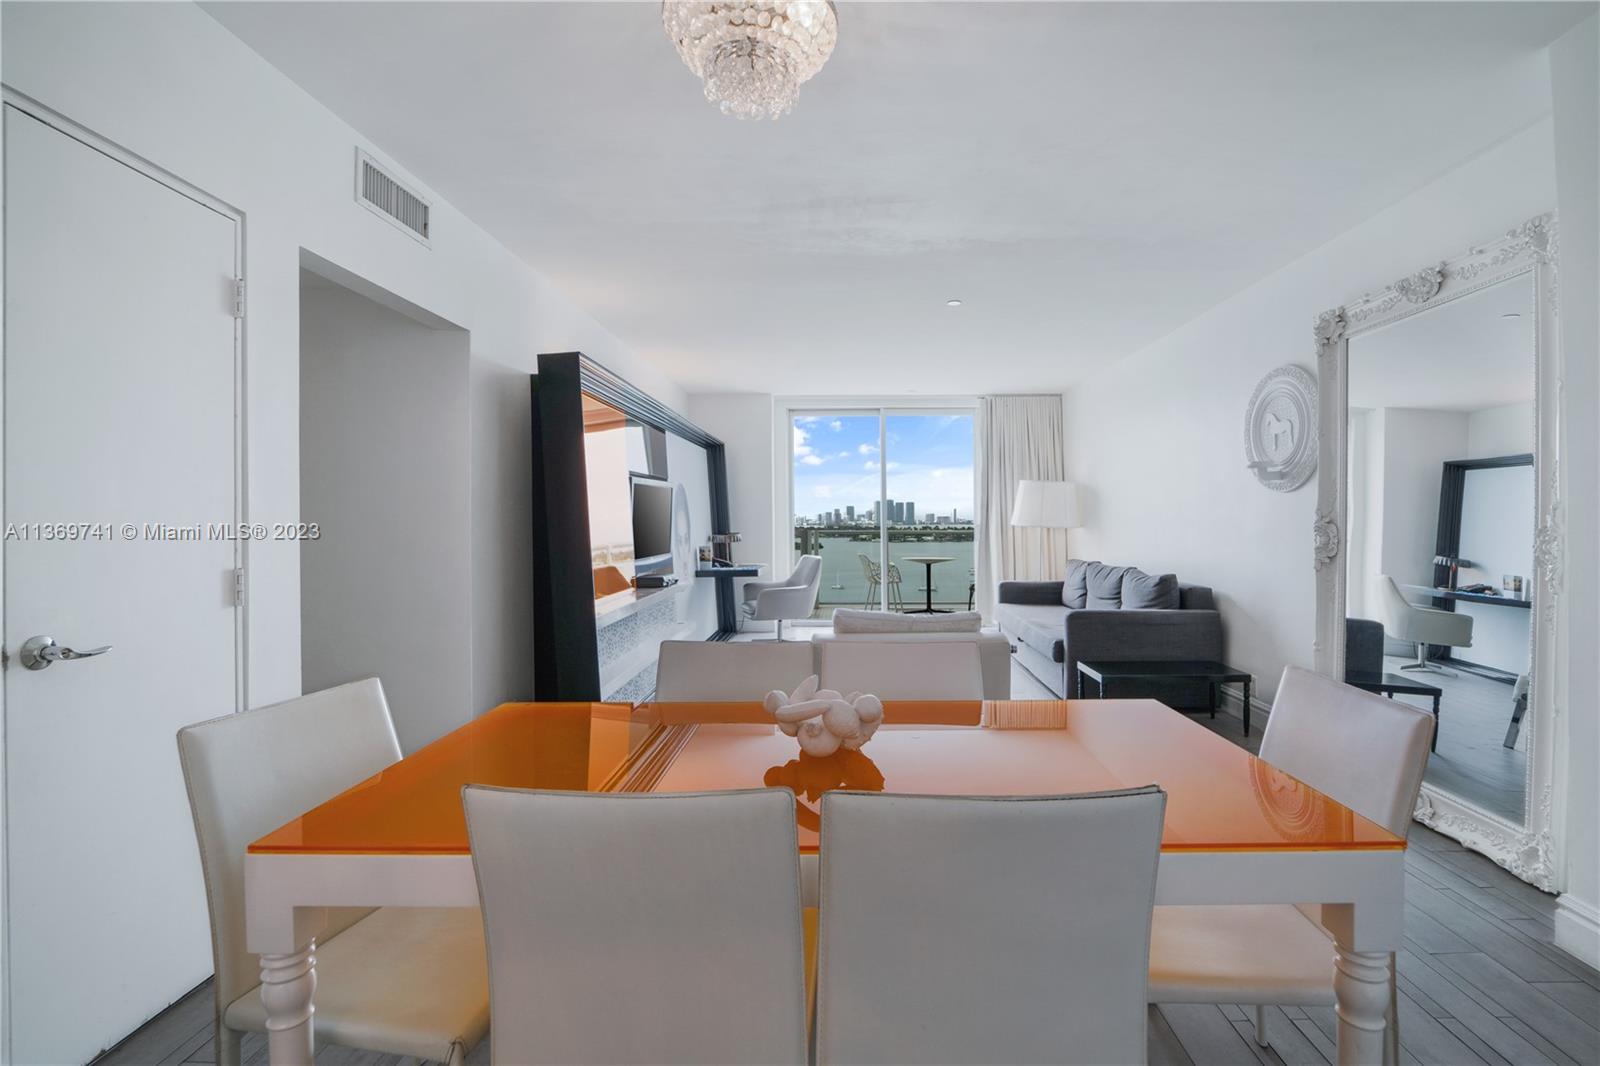 Repriced 1000 of  $$ below comps to sell fast! Great Deal. Spectacular 2Bed/2Bath residence at the newly renovated Mondrian Hotel in South Beach! Spectacular views of the bay, Downtown Miami, and of course Star Island. The unit features very bright spaces, ceramic flooring, a separate kitchen space, and spectacular views from every room, and it was designed and furnished by Marcel Wanders. Onsite facilities include a gorgeous pool, restaurants, a gym, and much more. This unit is NOT currently in the hotel program.